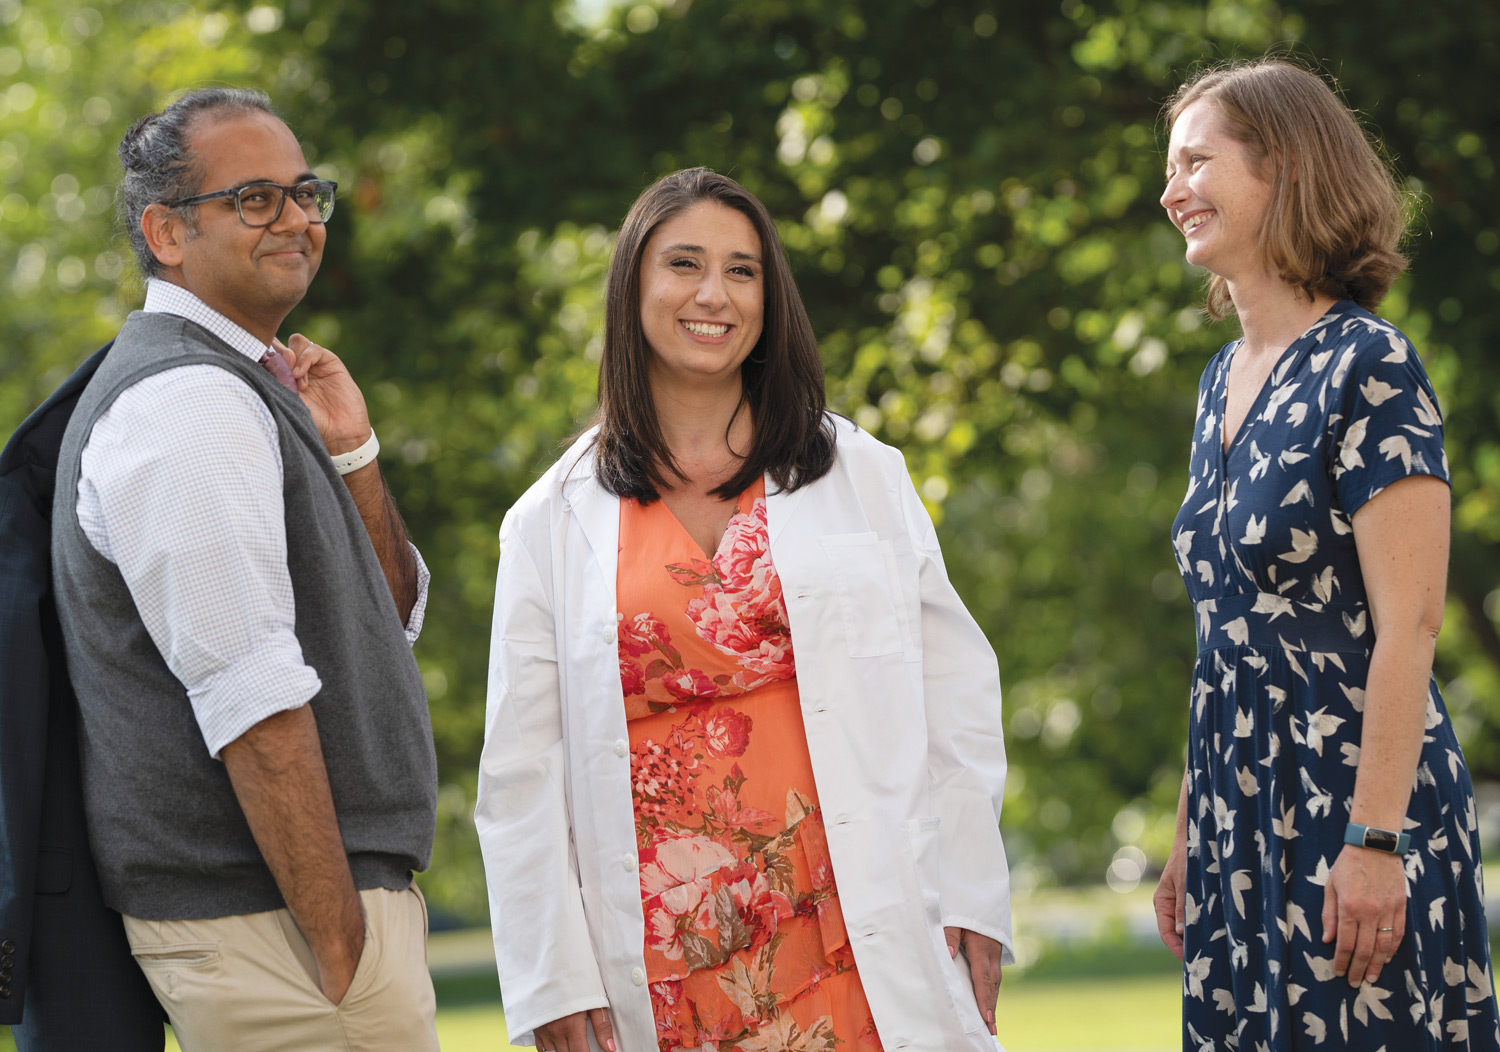 Four years after participating in the inaugural session of Dartmouth Health Care Foundations (DHCF), Jaclyn Engel (center) was welcomed into the Geisel School of Medicine Class of ’26. DHCF co-leaders Manish Mishra MED’05, MPH’09 (left) and Elizabeth Carpenter-Song, PhD, D’01 (right) attended Engel’s White Coat Ceremony.